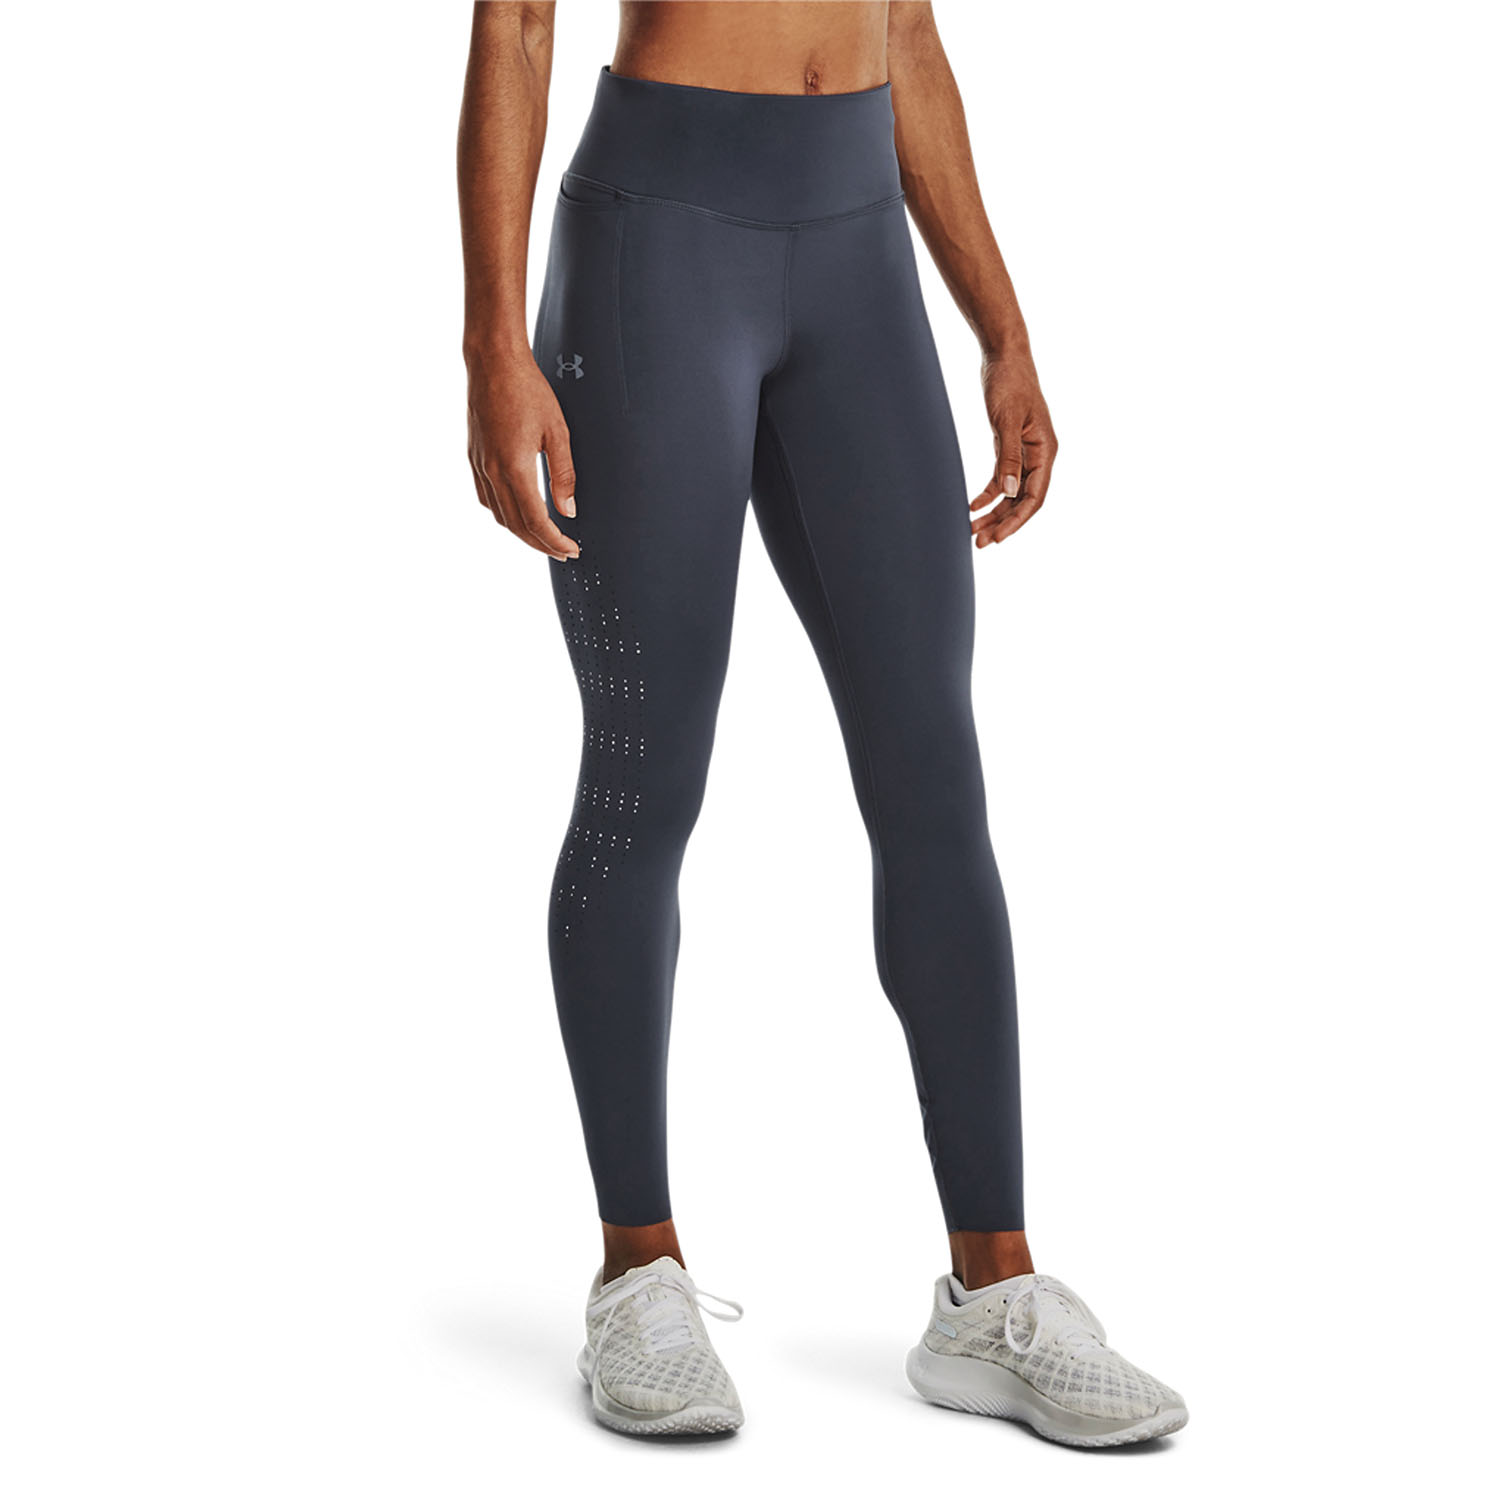 Under Armour FlyFast Elite Tights - Downpour Gray